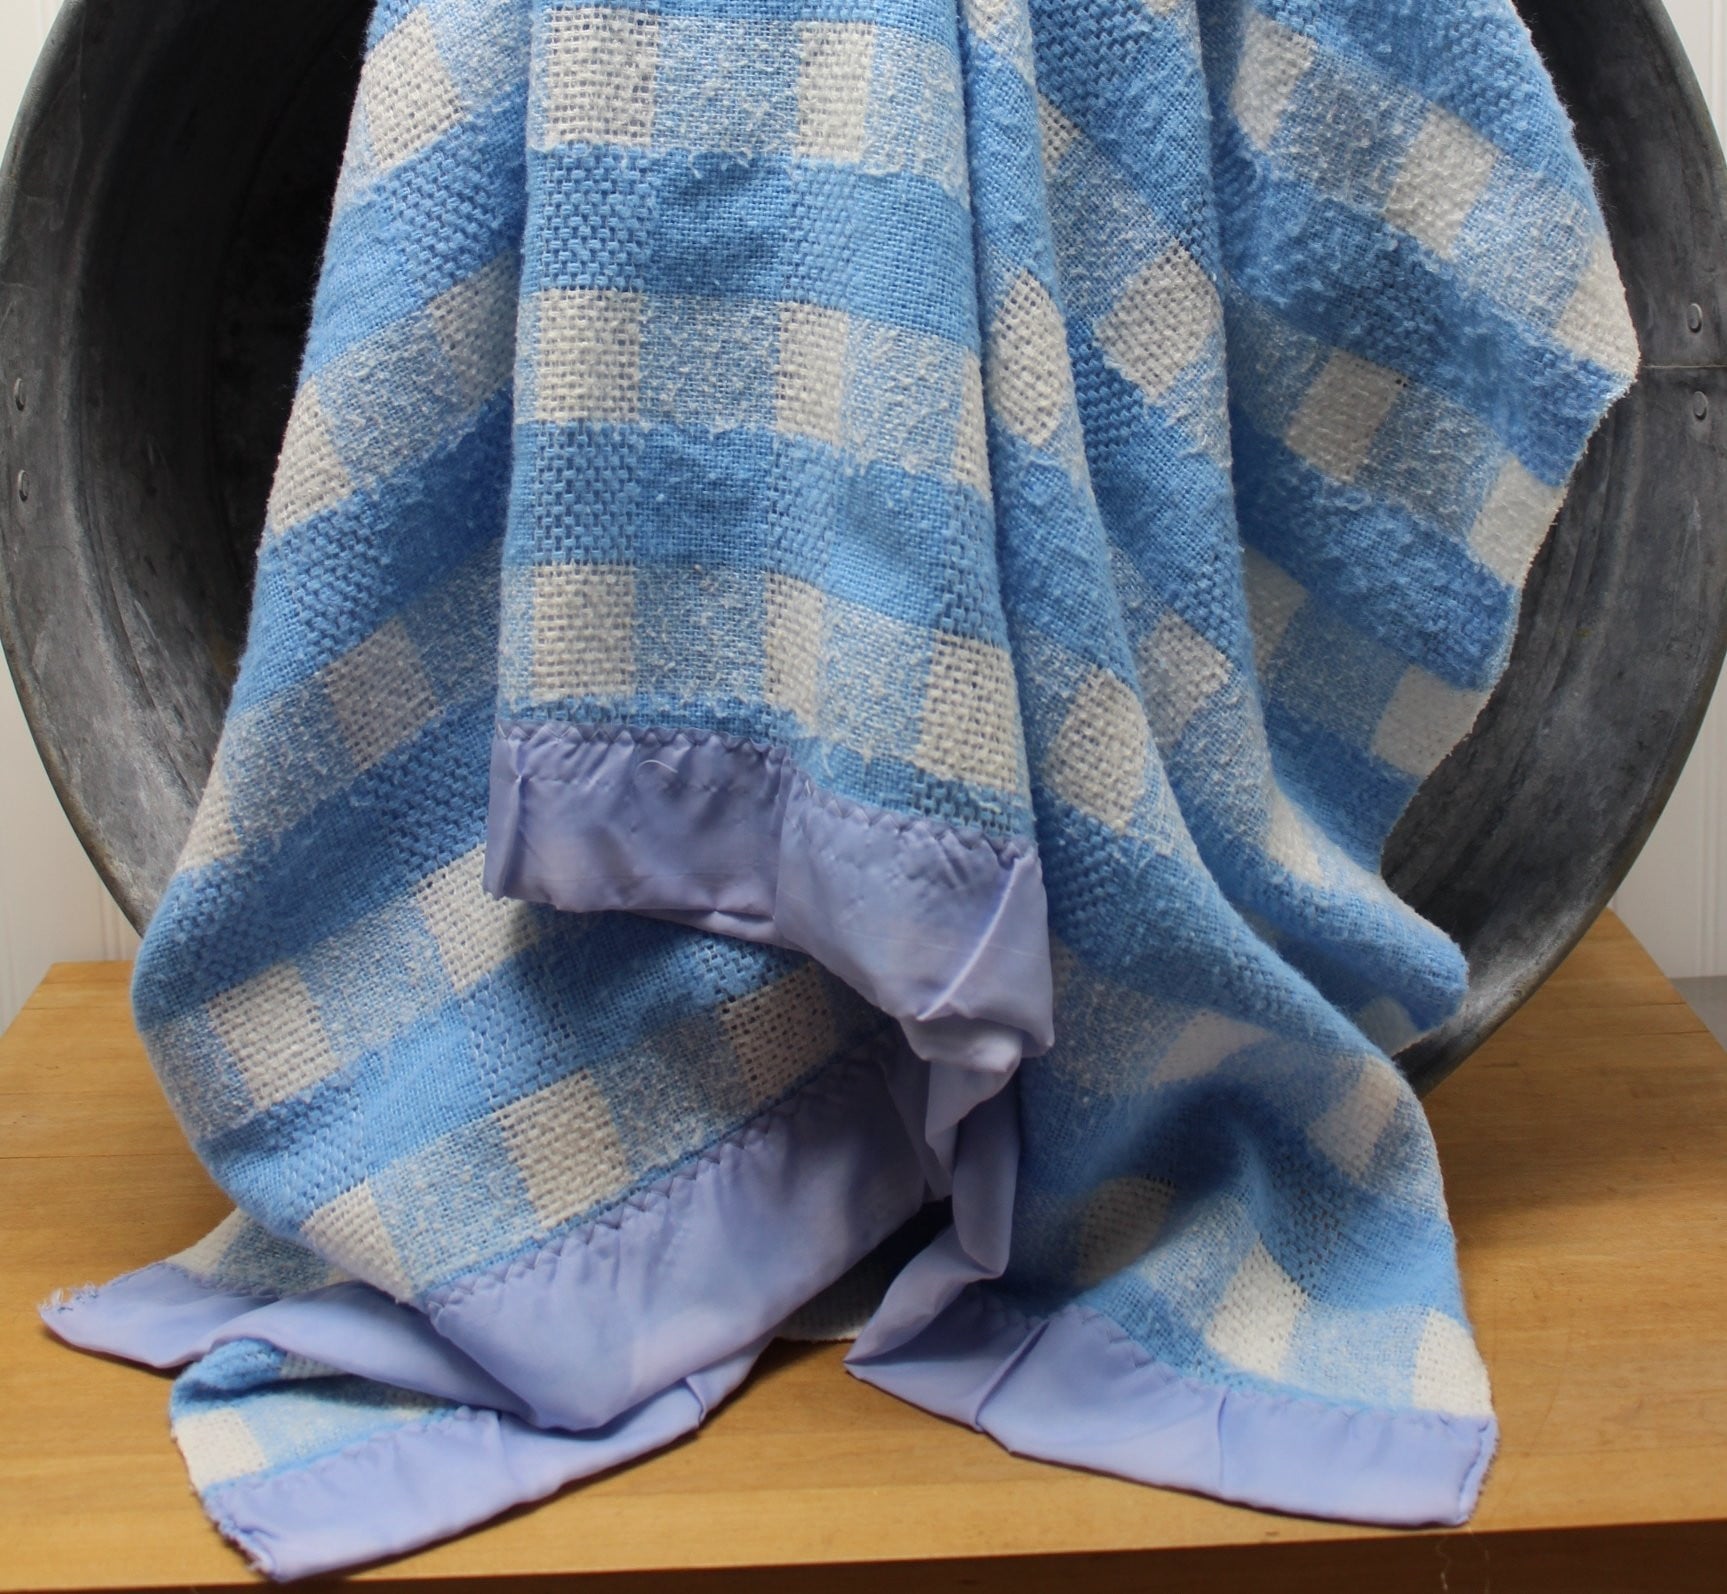 Unbranded Acrylic Blend Blanket - Blue White Checks Vintage Cottage Chic 60" X 90" extra long